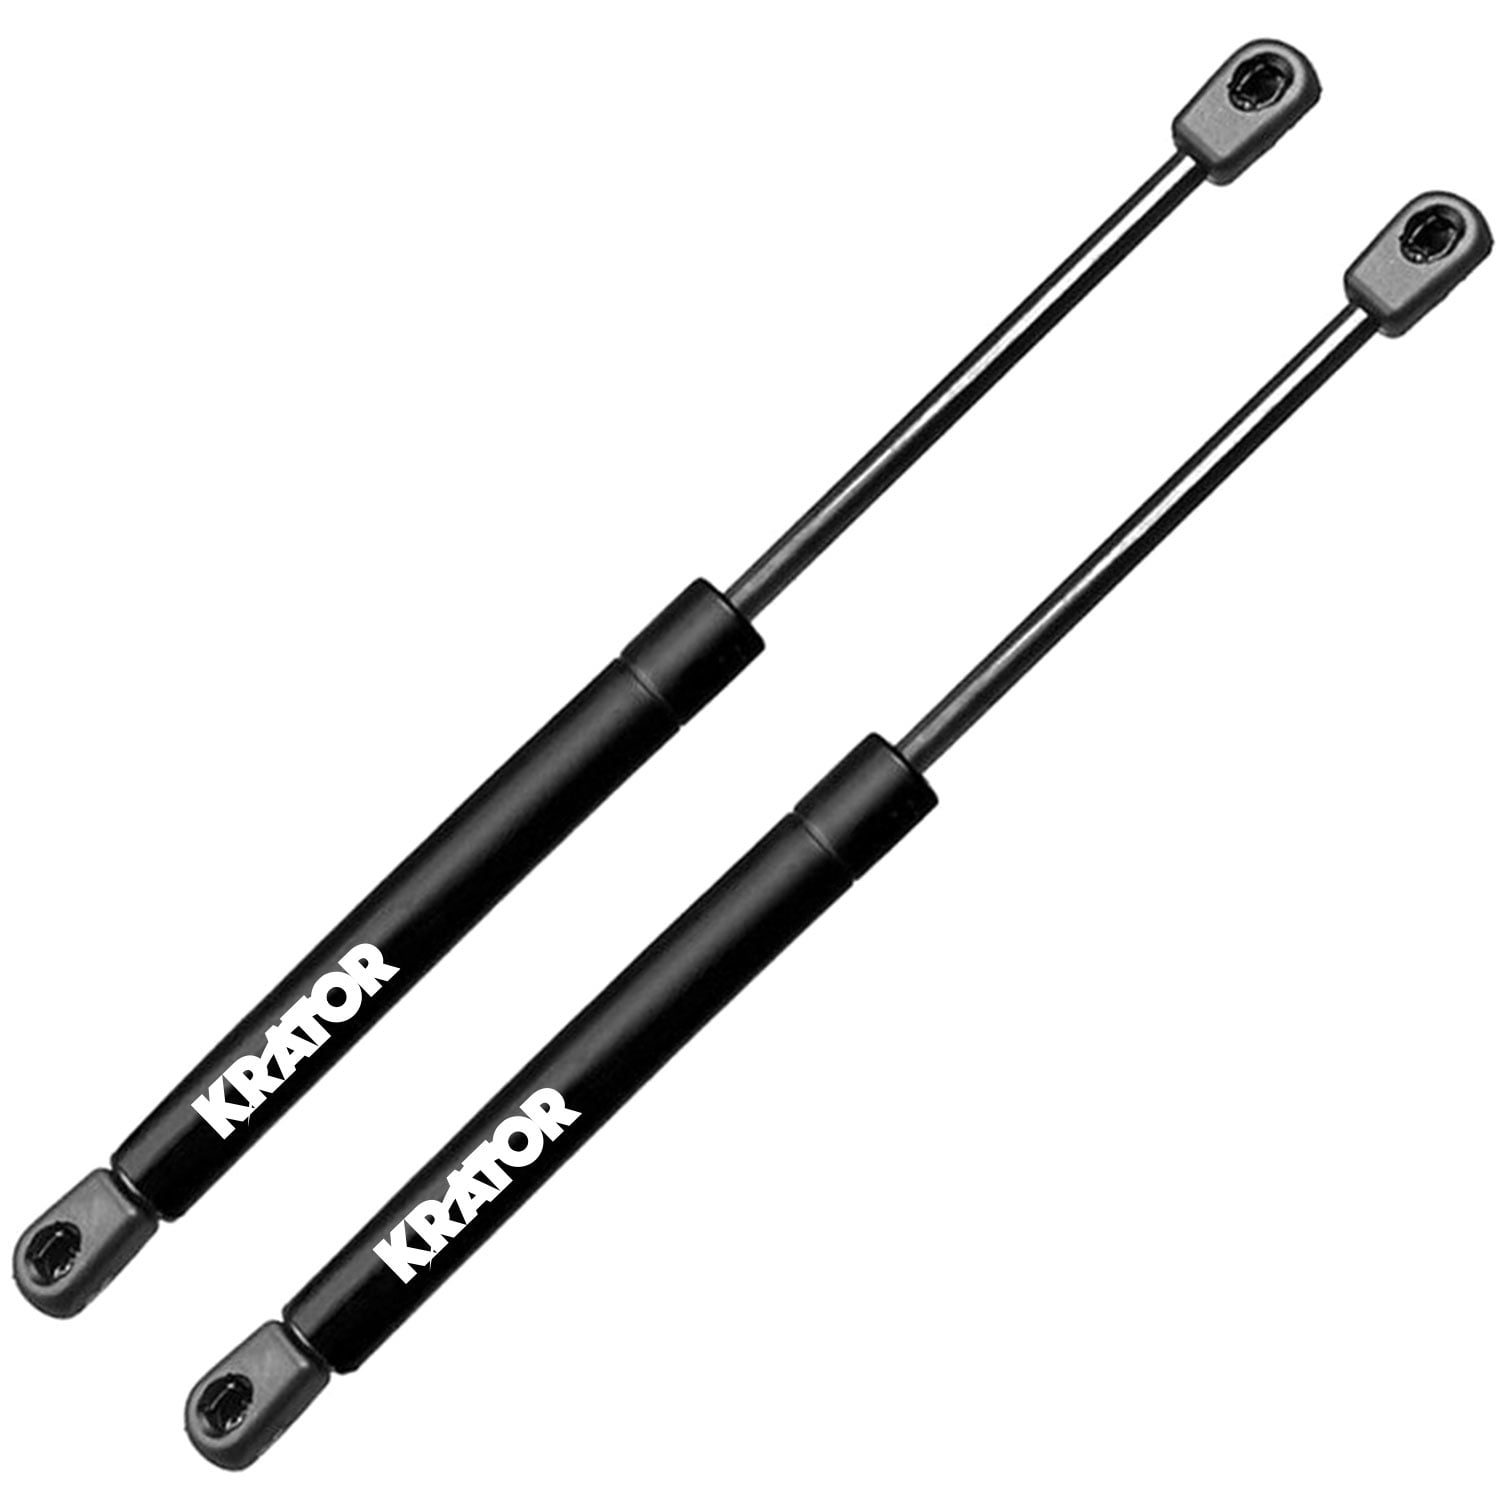 Krator Liftgate Hatch Supports Compatible with Chevrolet Tahoe 2007-2014 - Liftgate (Hatch) Gas Springs Prop Arms - Walmart.com